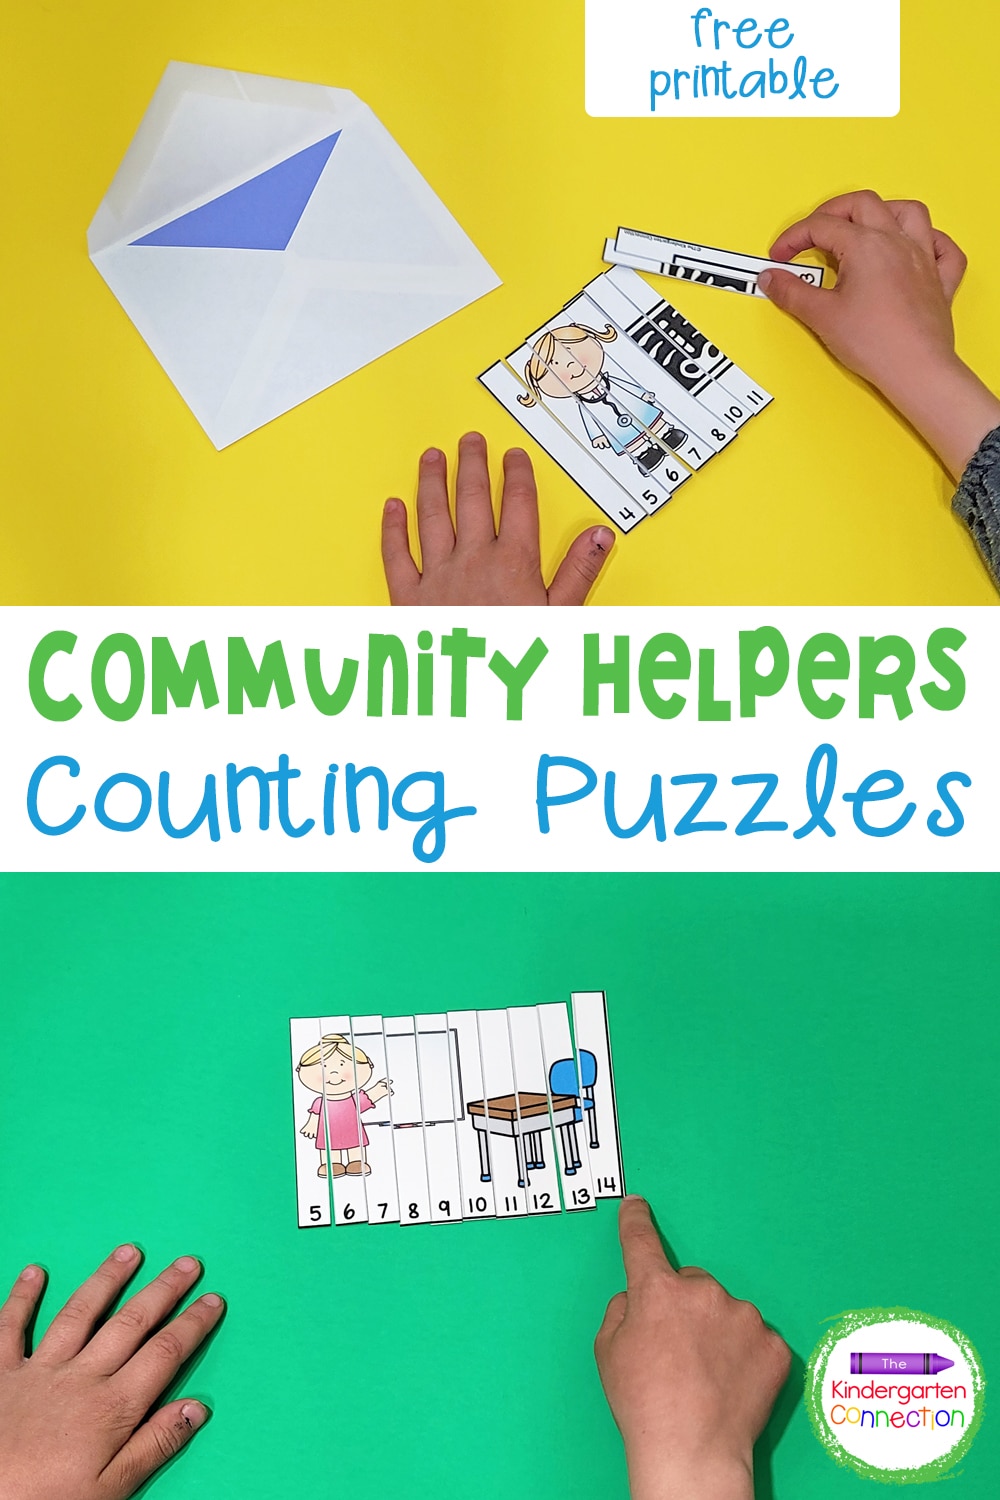 FREE Community Helpers Counting Puzzles